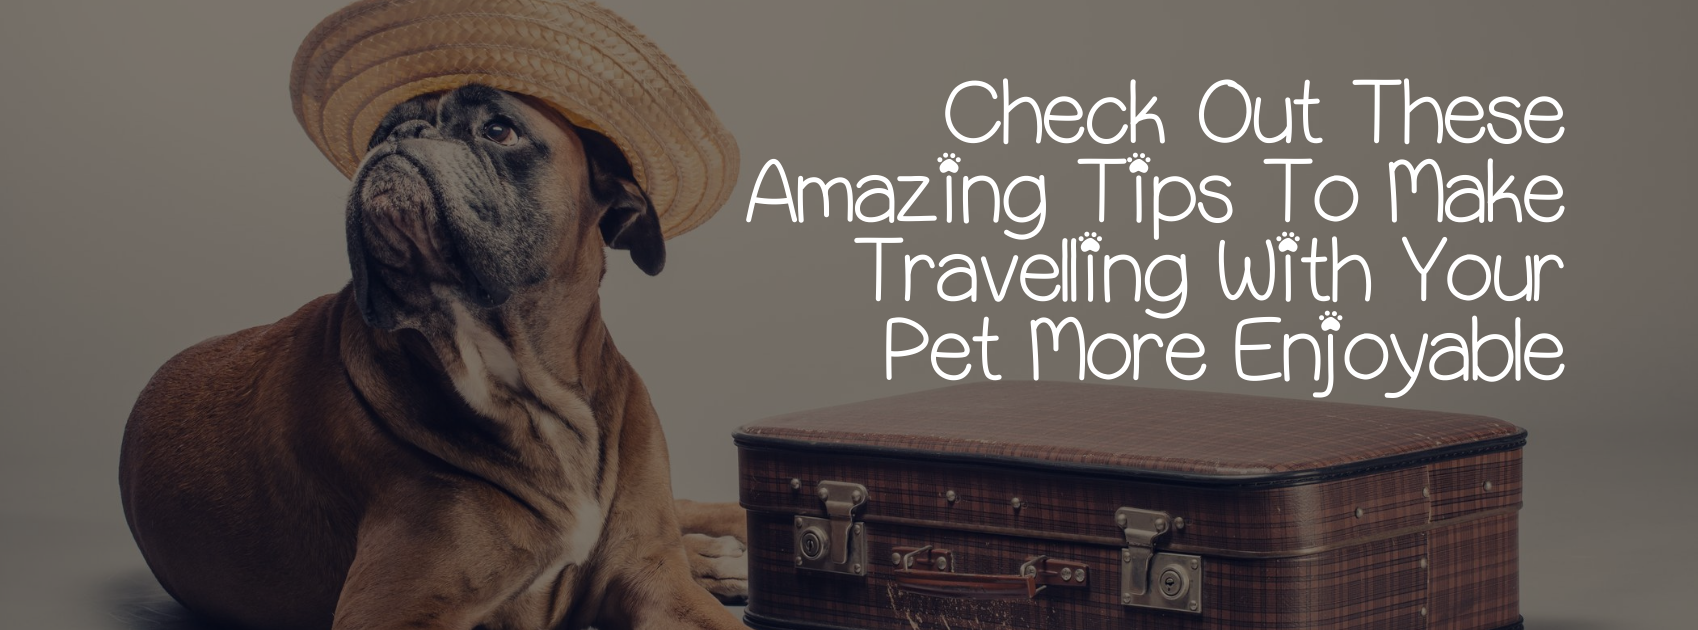 CHECK OUT THESE AMAZING TIPS TO MAKE TRAVELLING WITH YOUR PET MORE ENJOYABLE